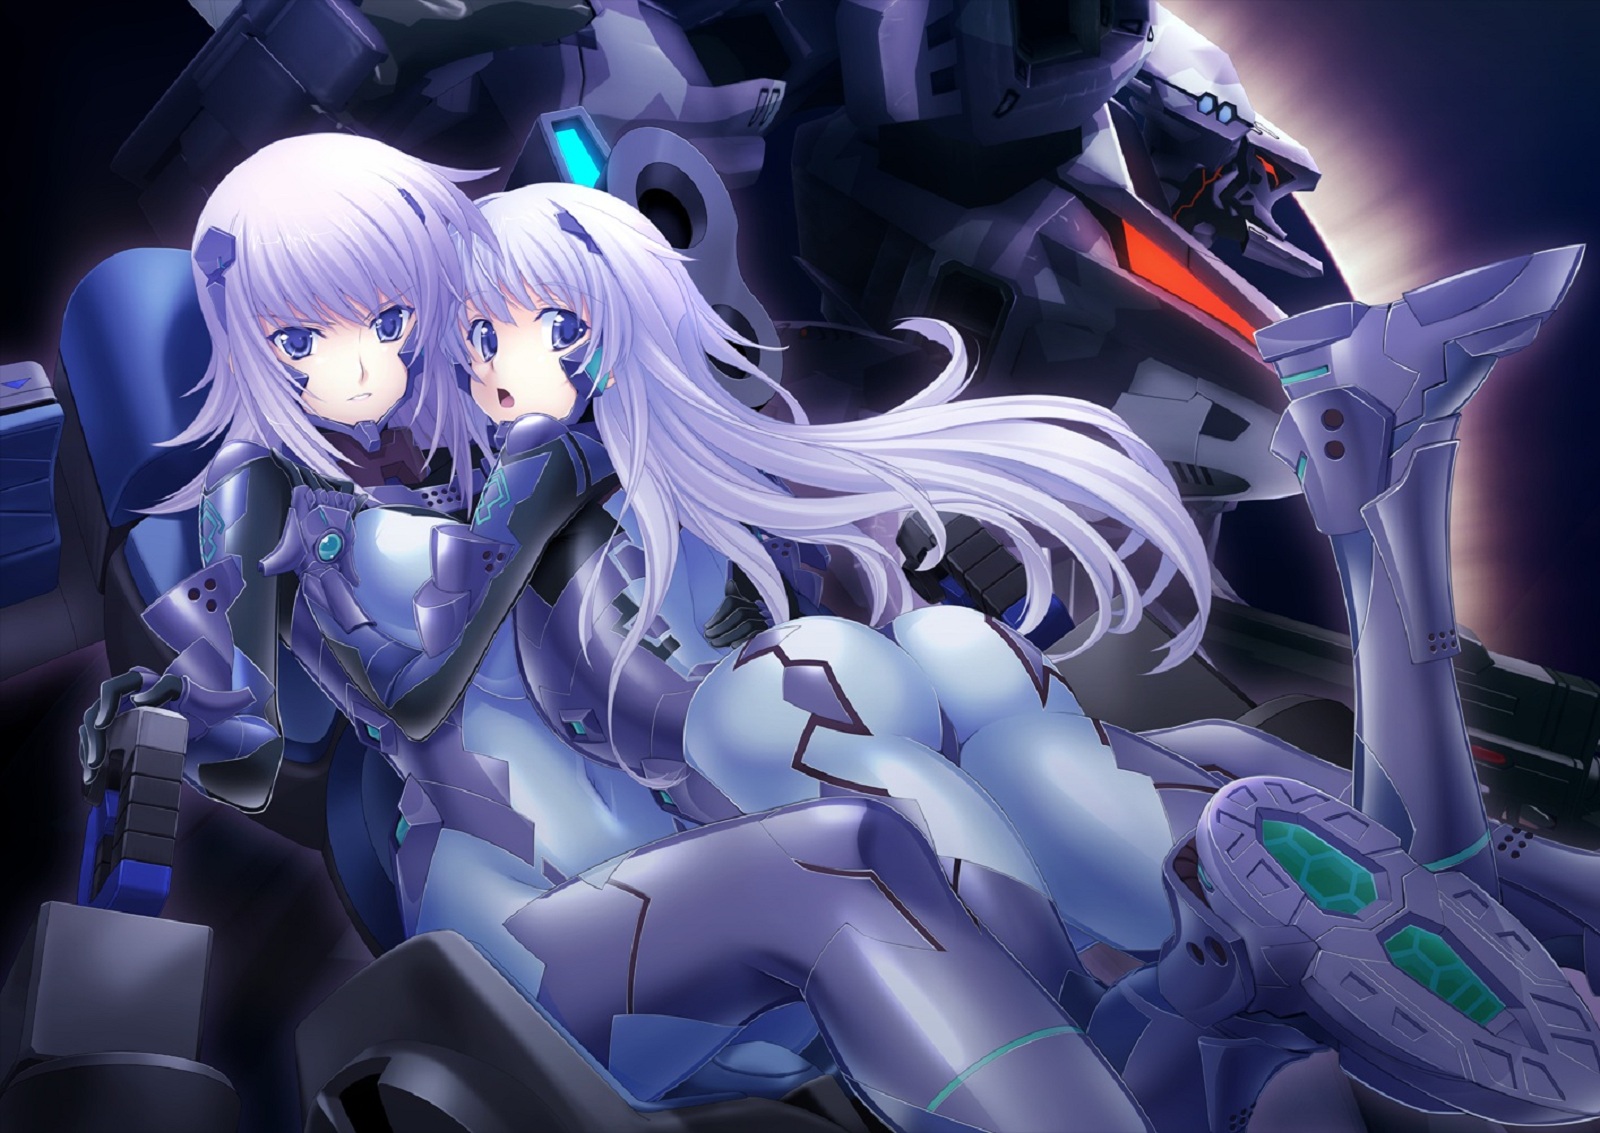 Muv-luv Alternative Backgrounds, Compatible - PC, Mobile, Gadgets| 1600x1133 px